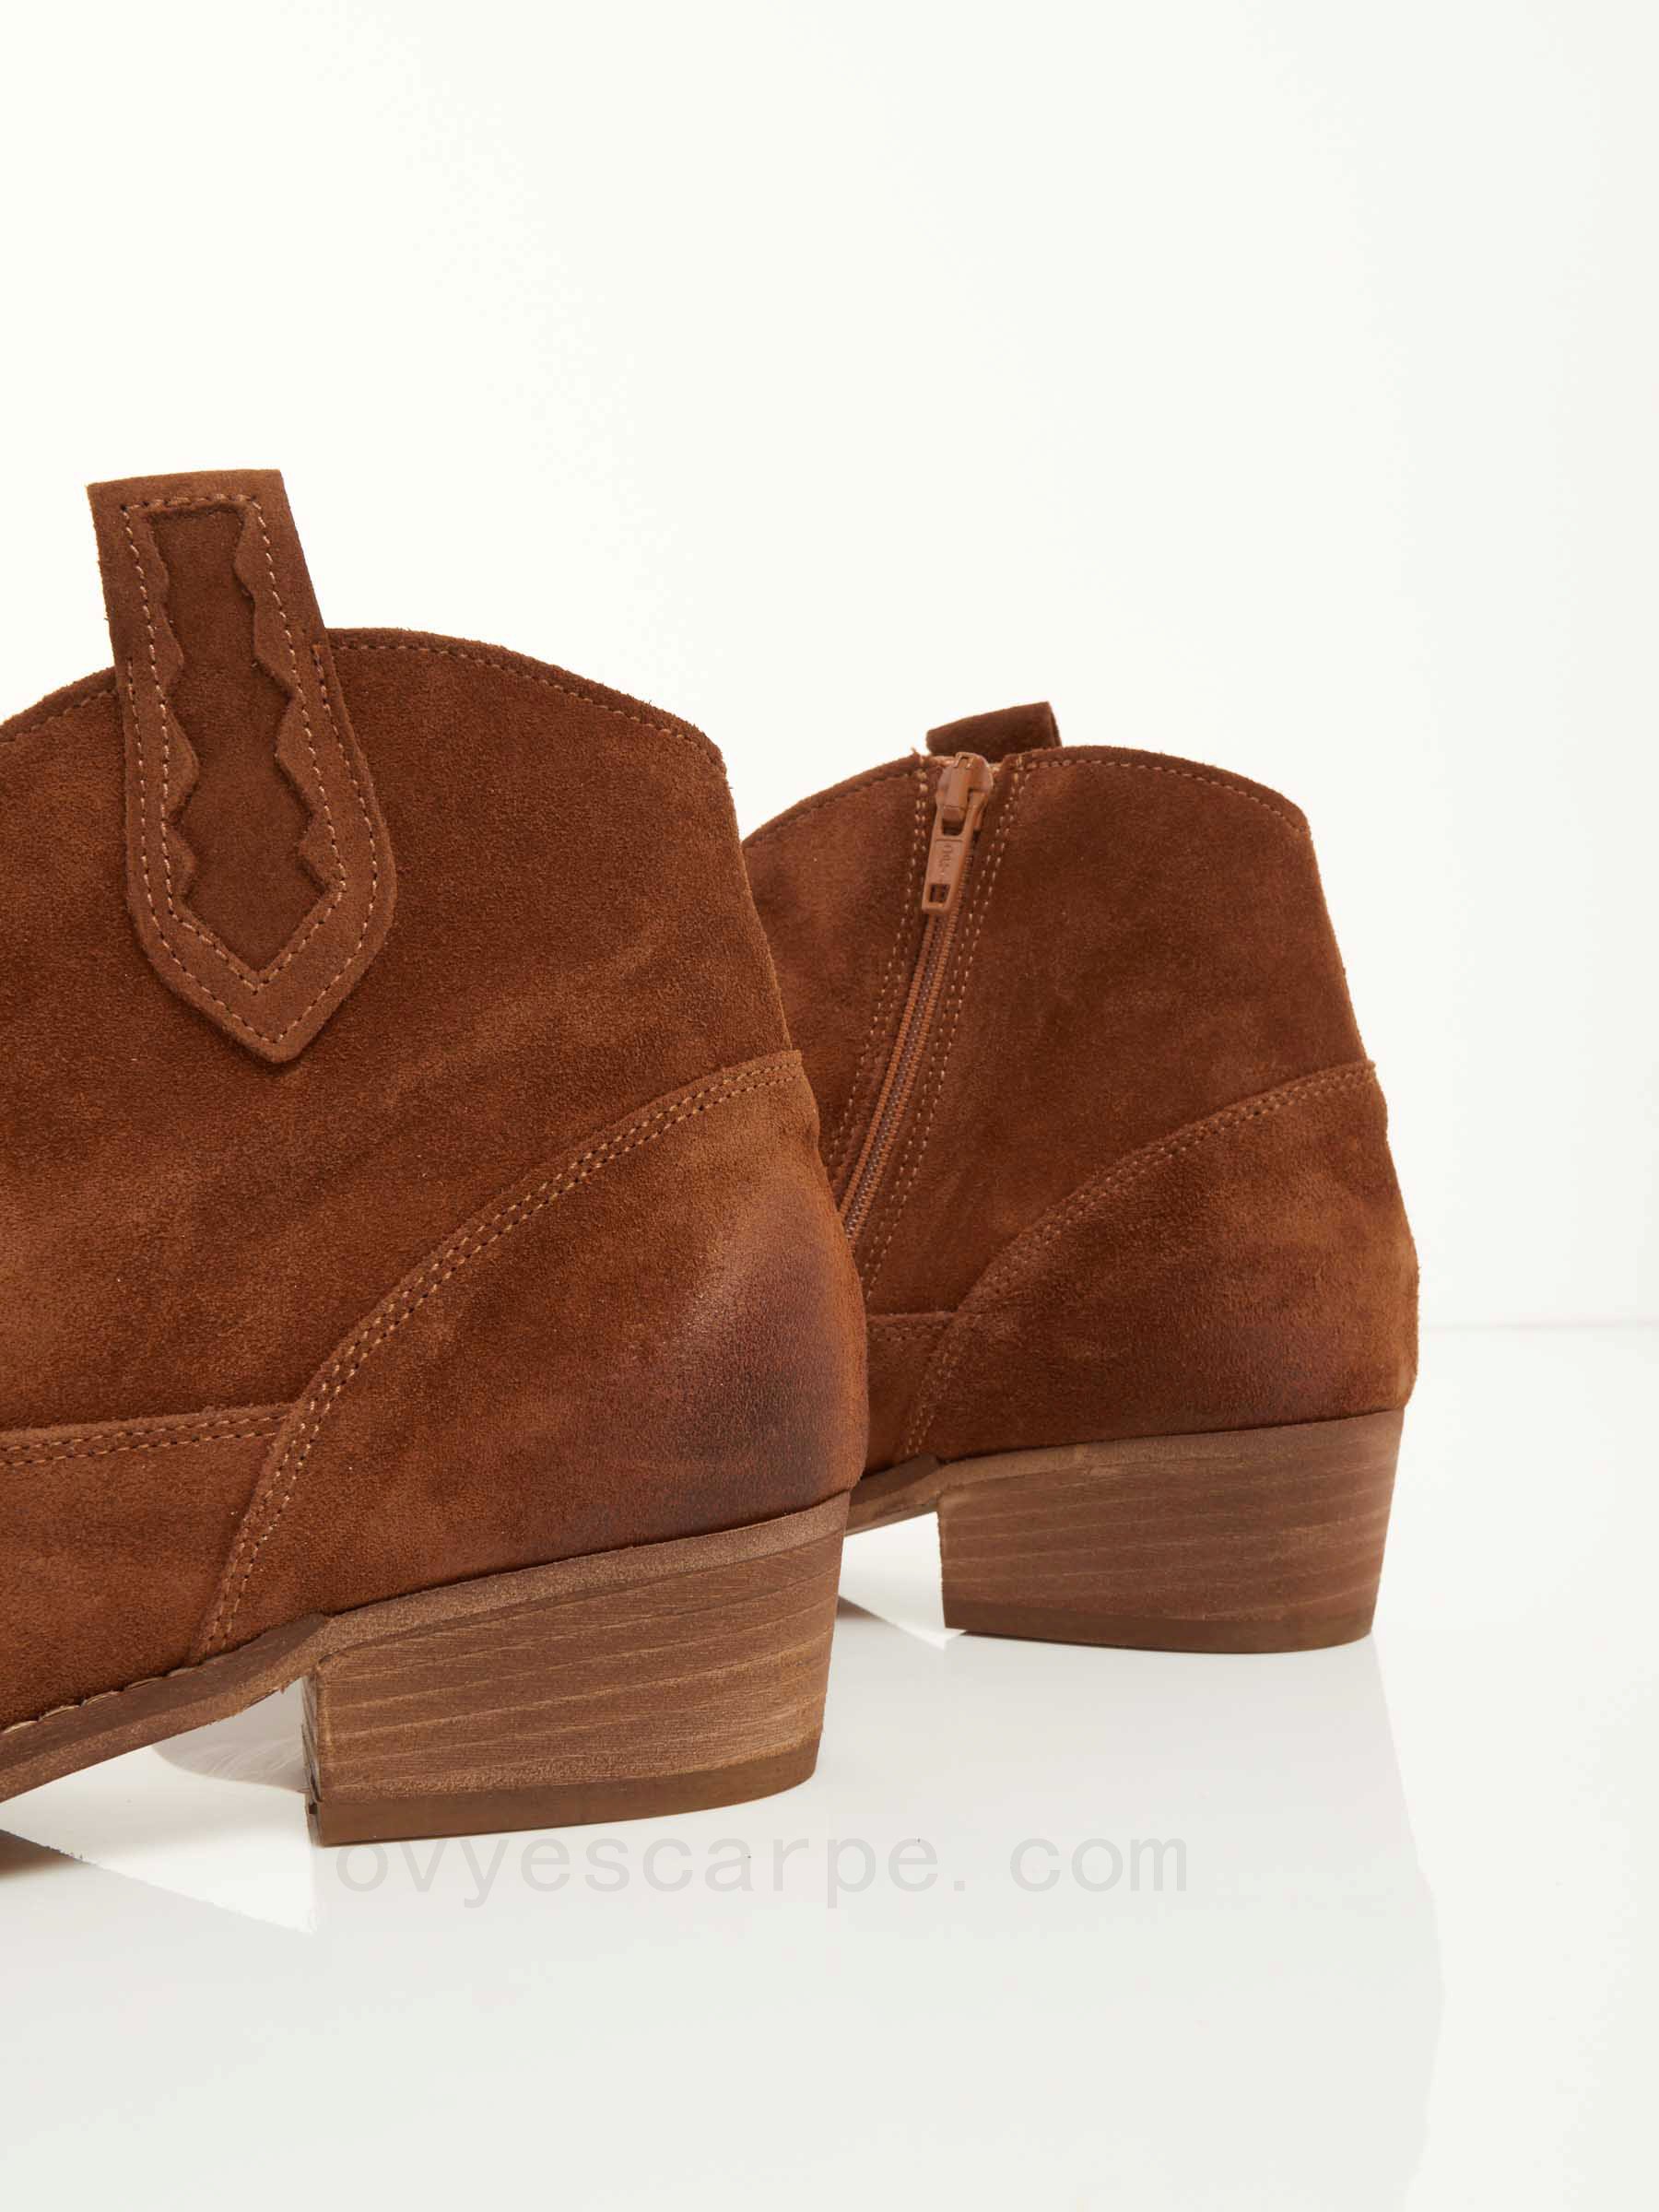 Suede Cowboy Ankle Boots F08161027-0524 Sconti